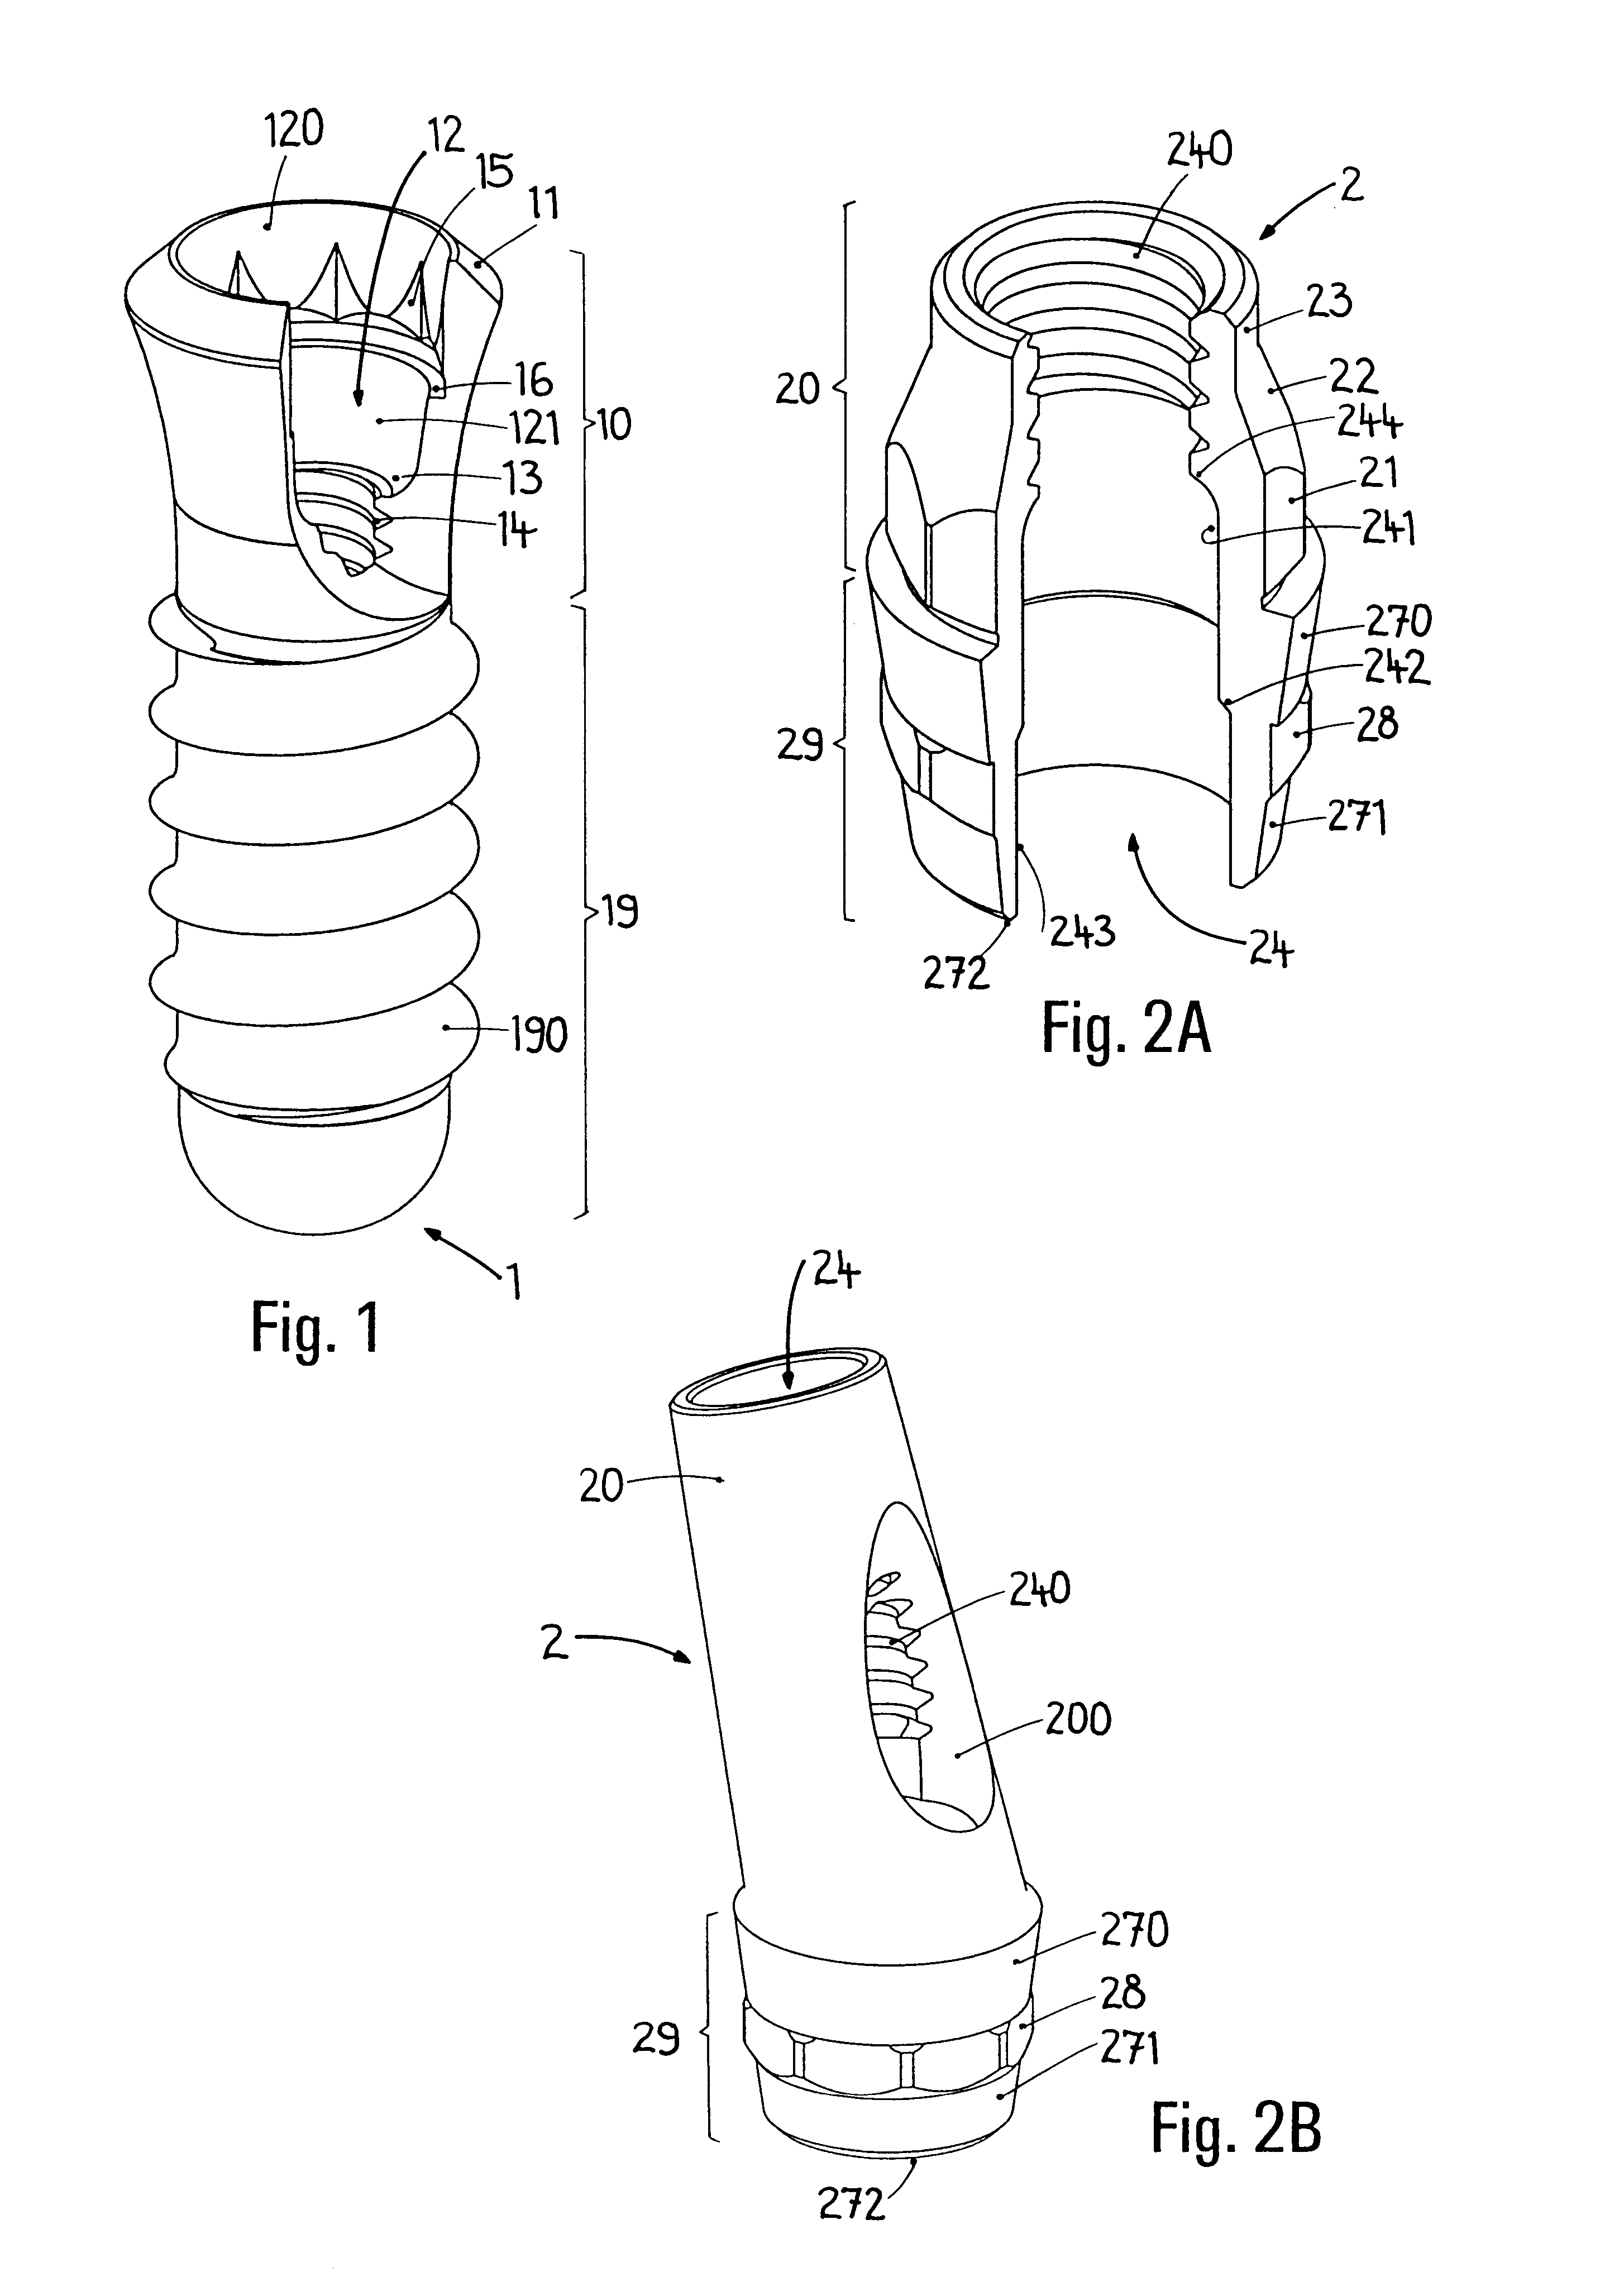 Connection between a dental implant and an abutment